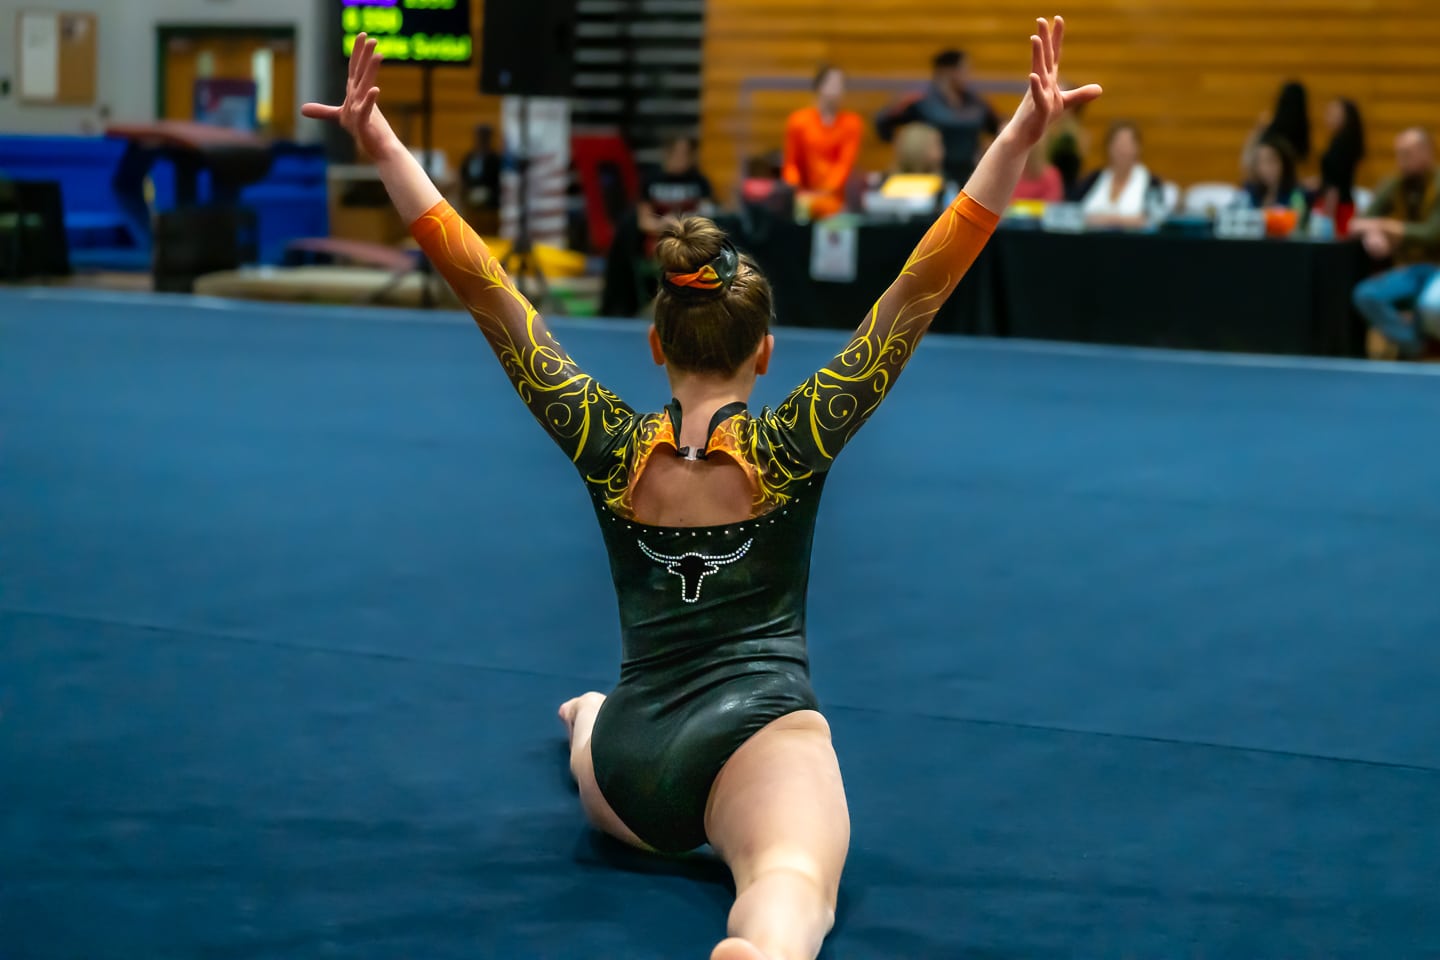 Gymnast in a black and orange leotard with arms raised in a seated pose on a gymnastics floor.